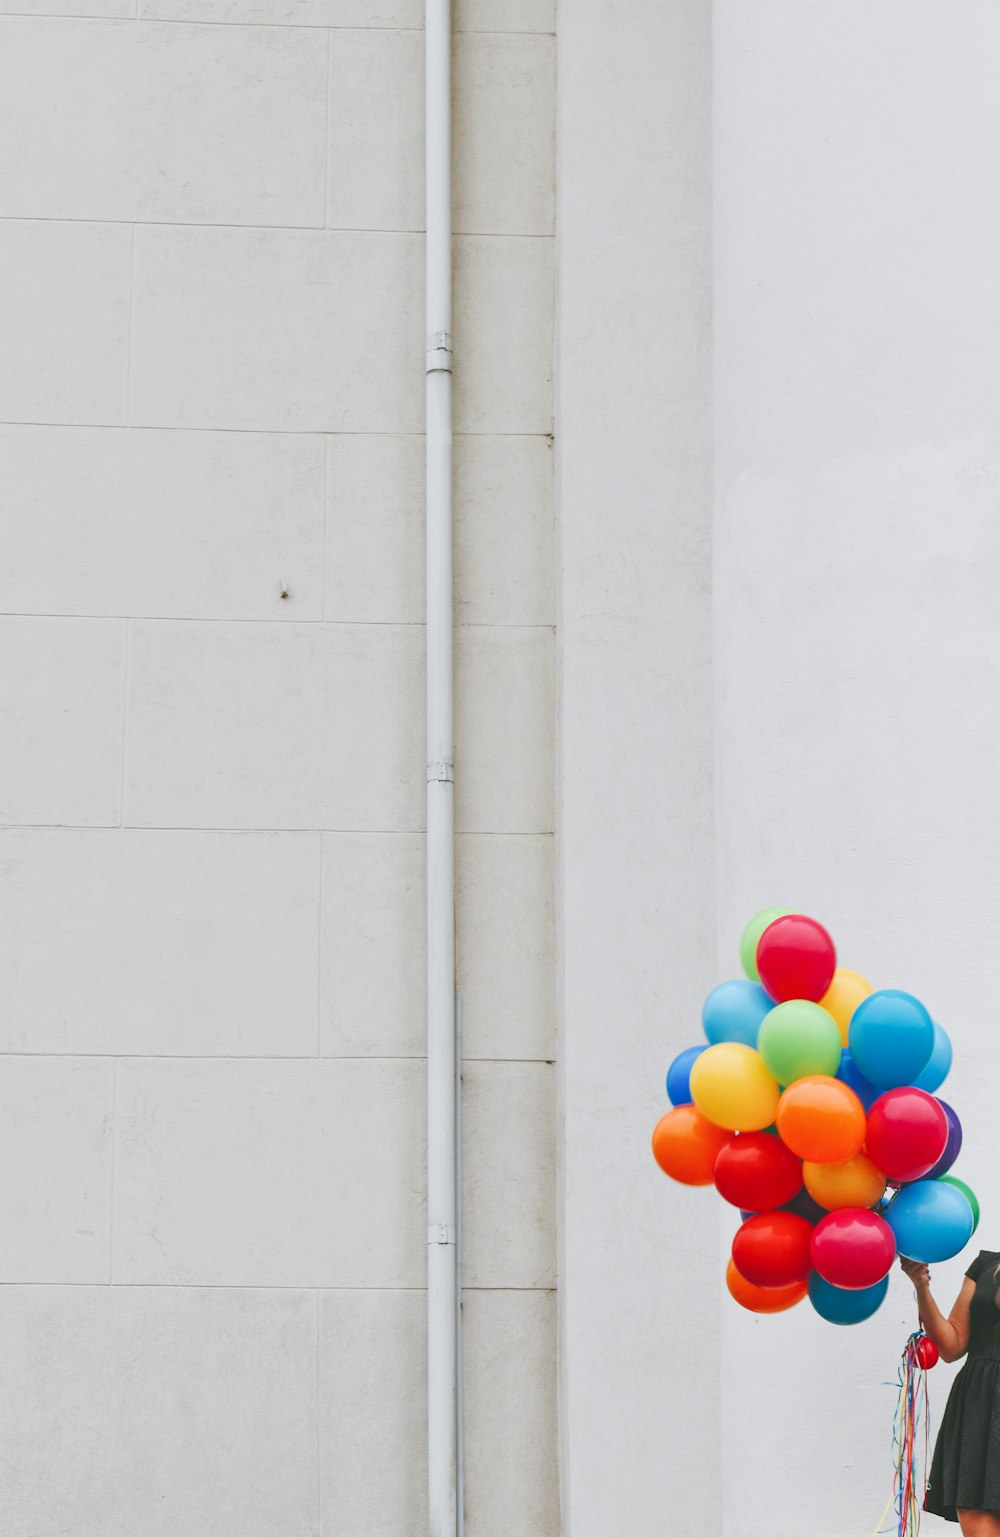 woman holding balloons